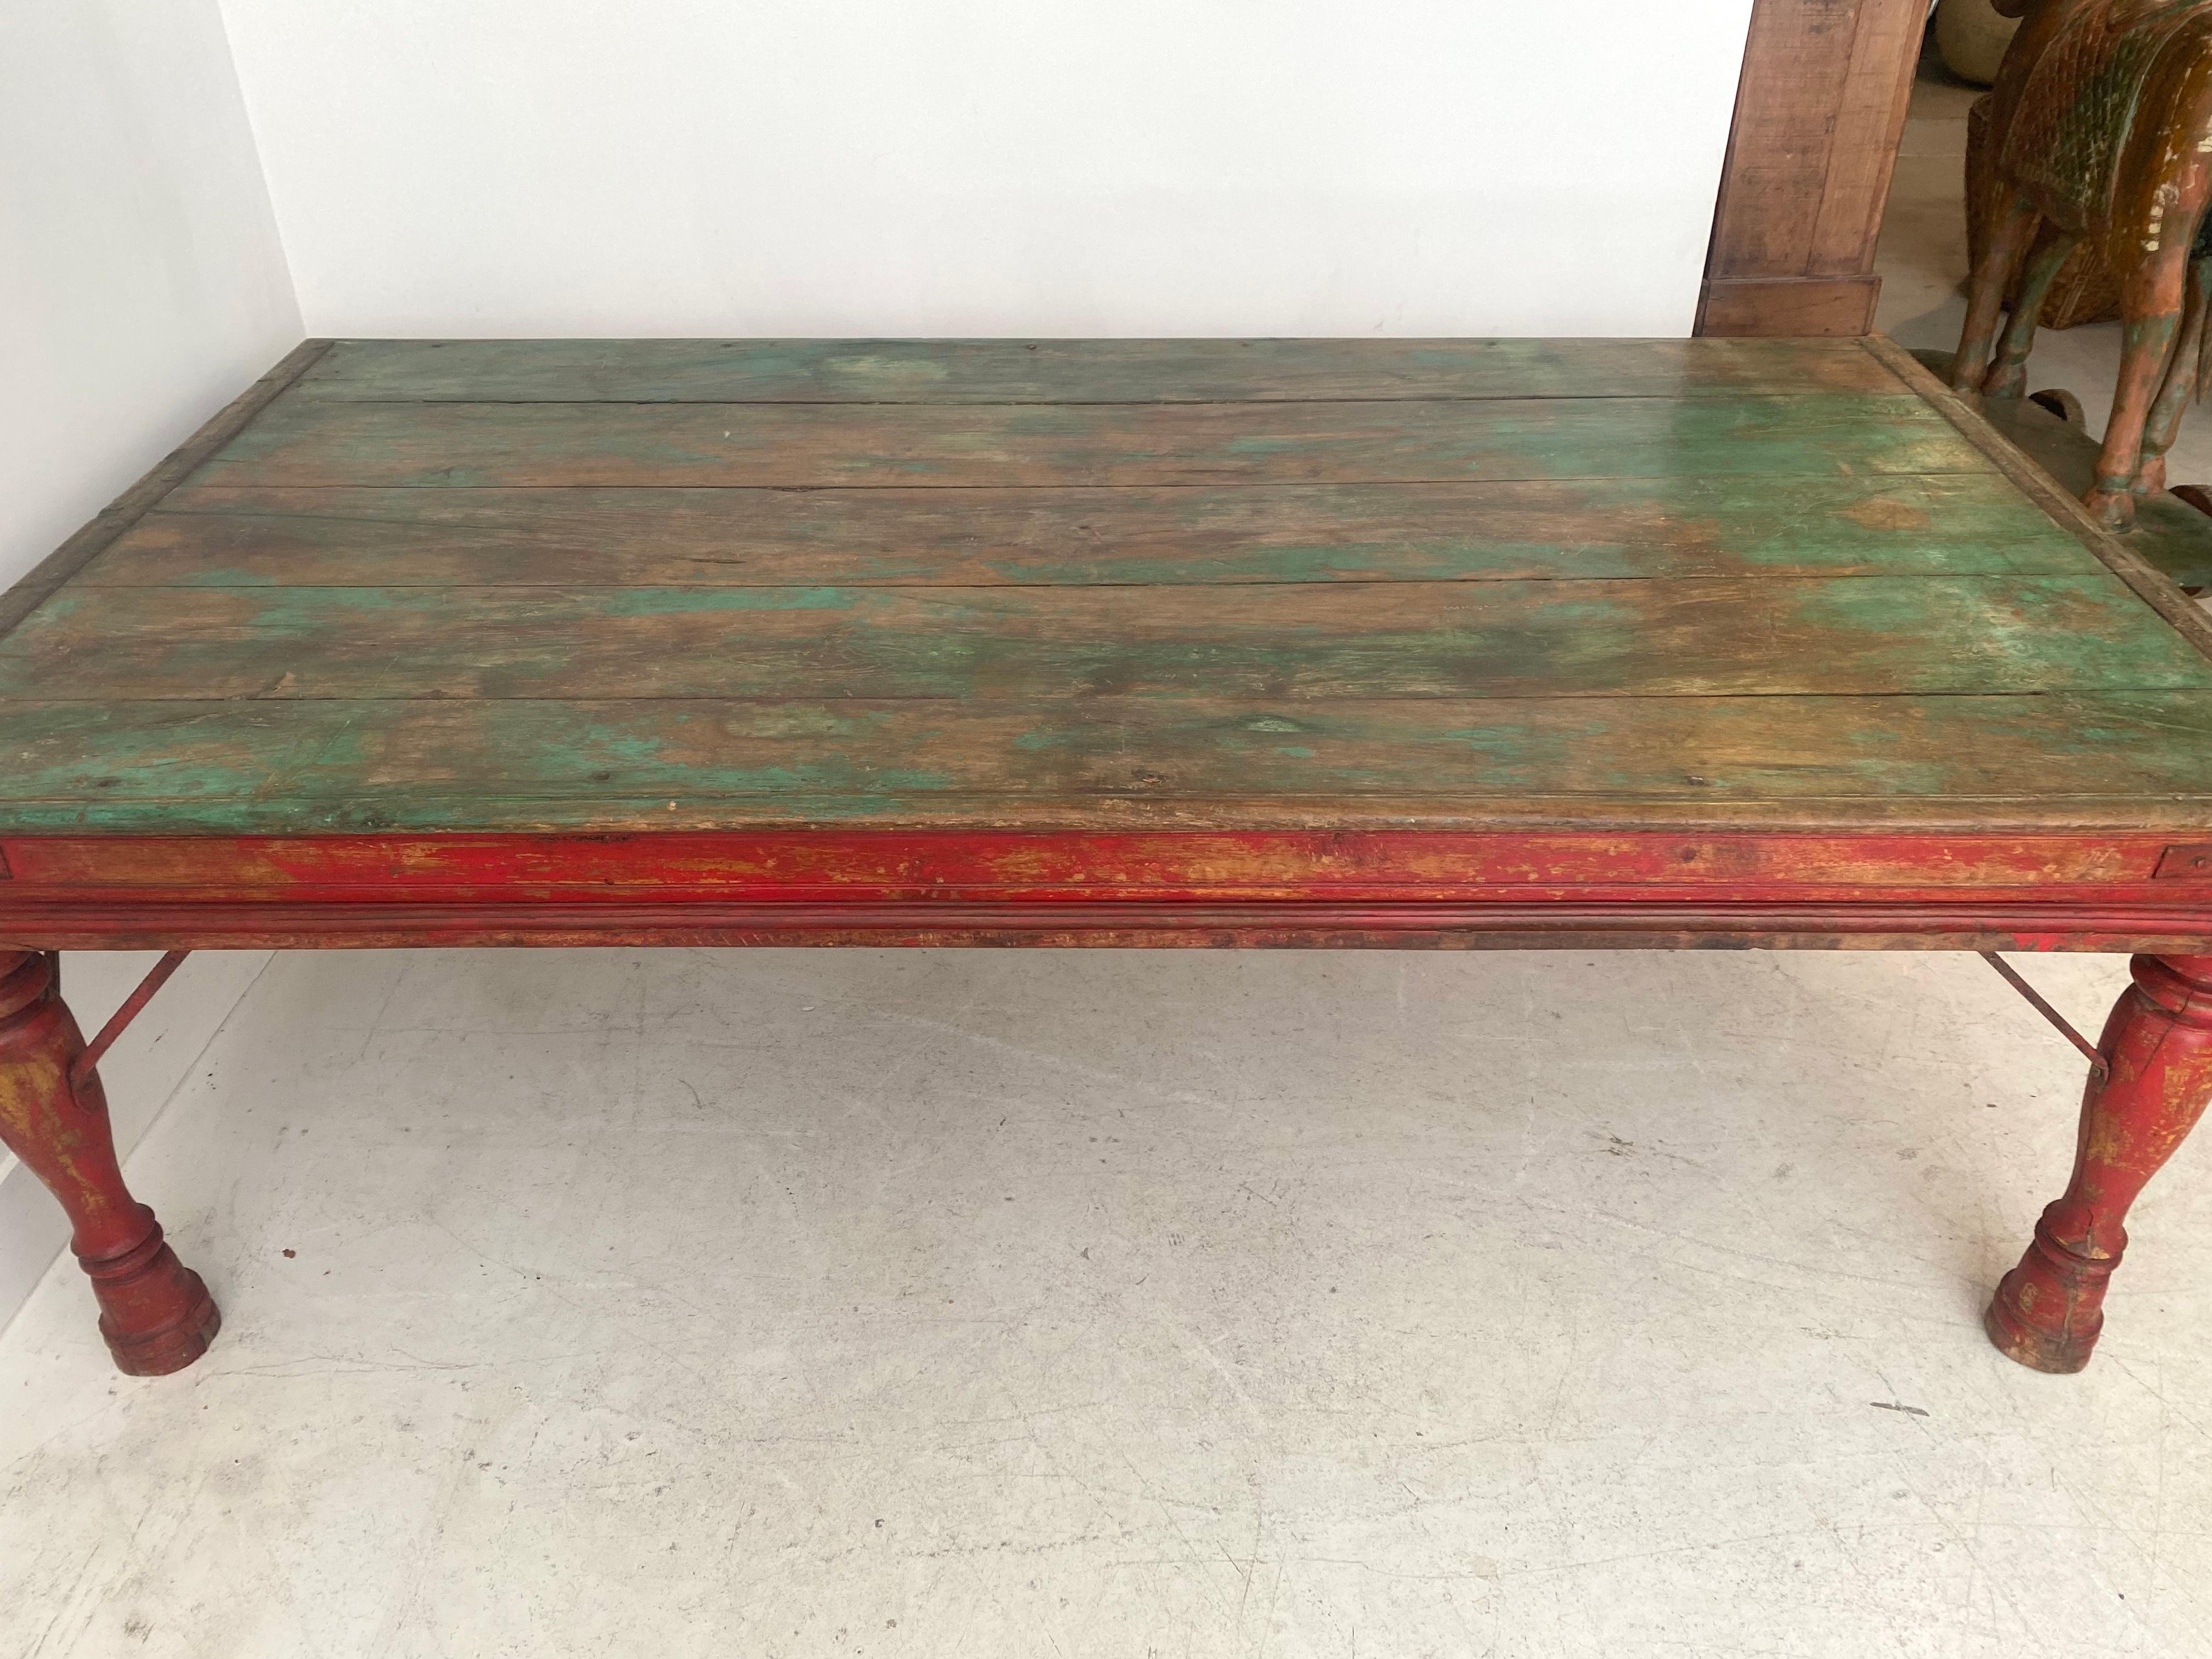 Traditional indian coffee table Hand painted in red and Green.
Very Nice piece in teakwood.
You can live it outside. 
Excellent condition.
Sourced in Rajasthan 